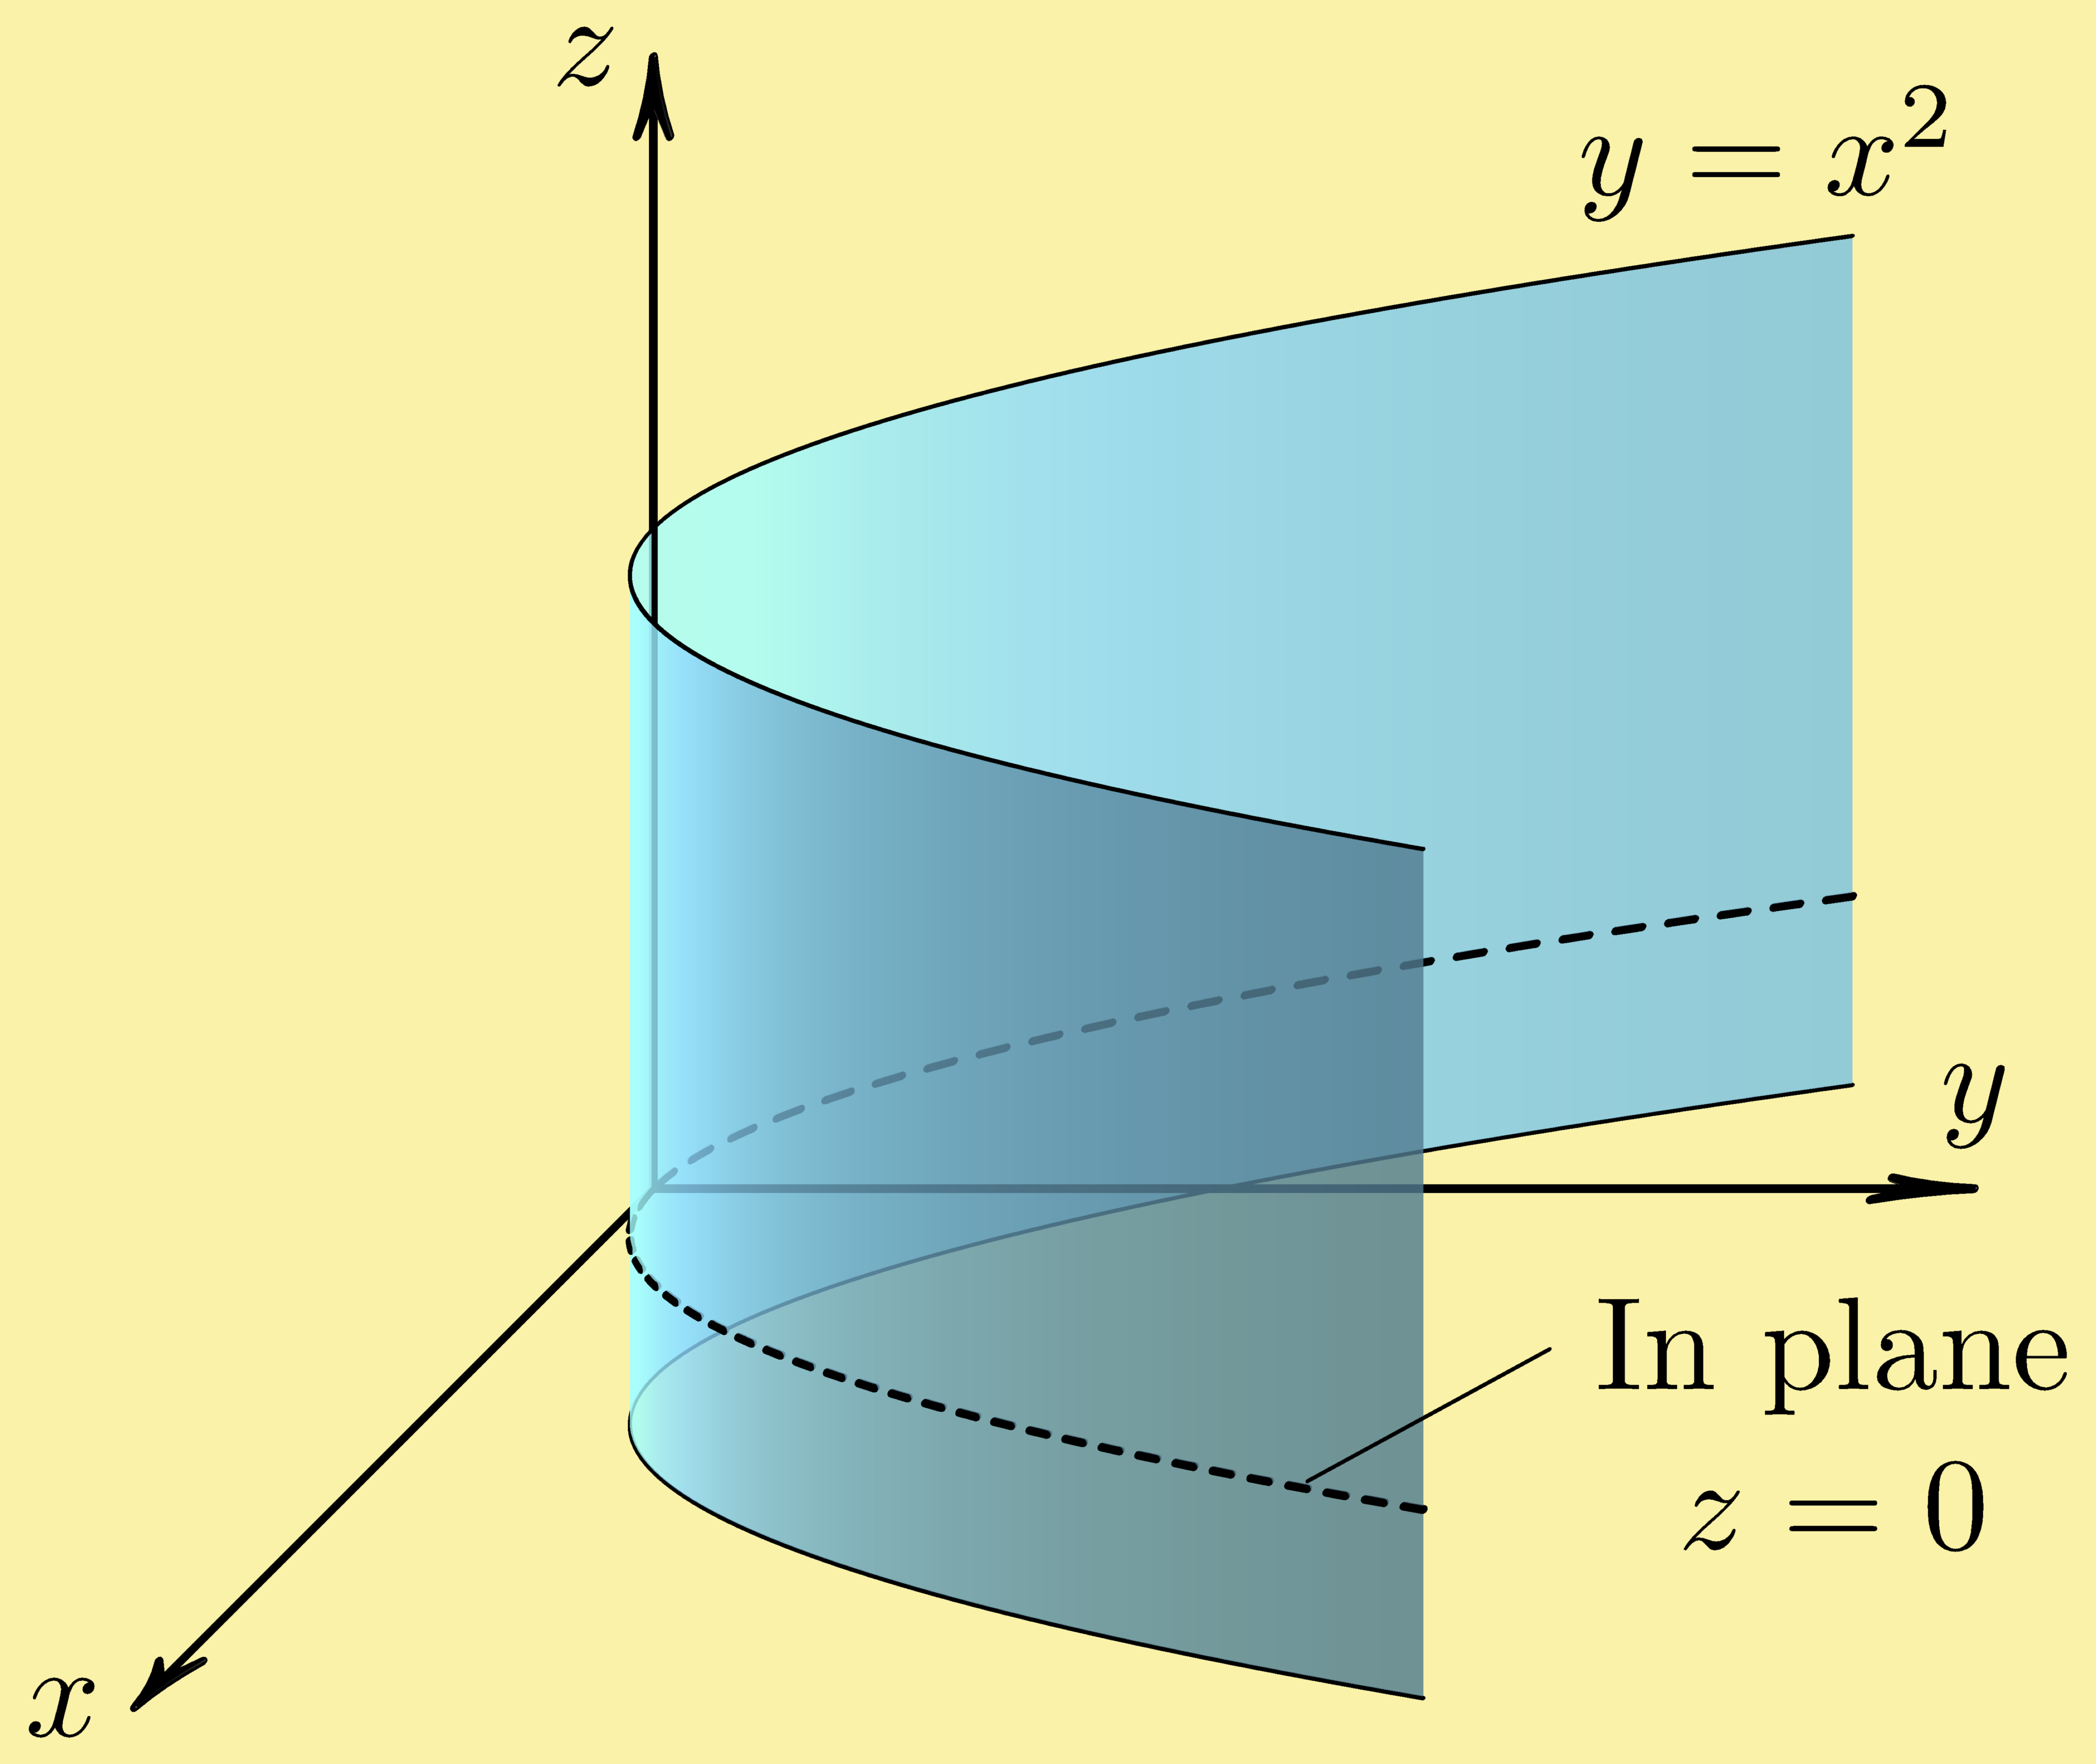 parabolic cylinder 3-space coordinate system xyz R3 Cartesian three-space